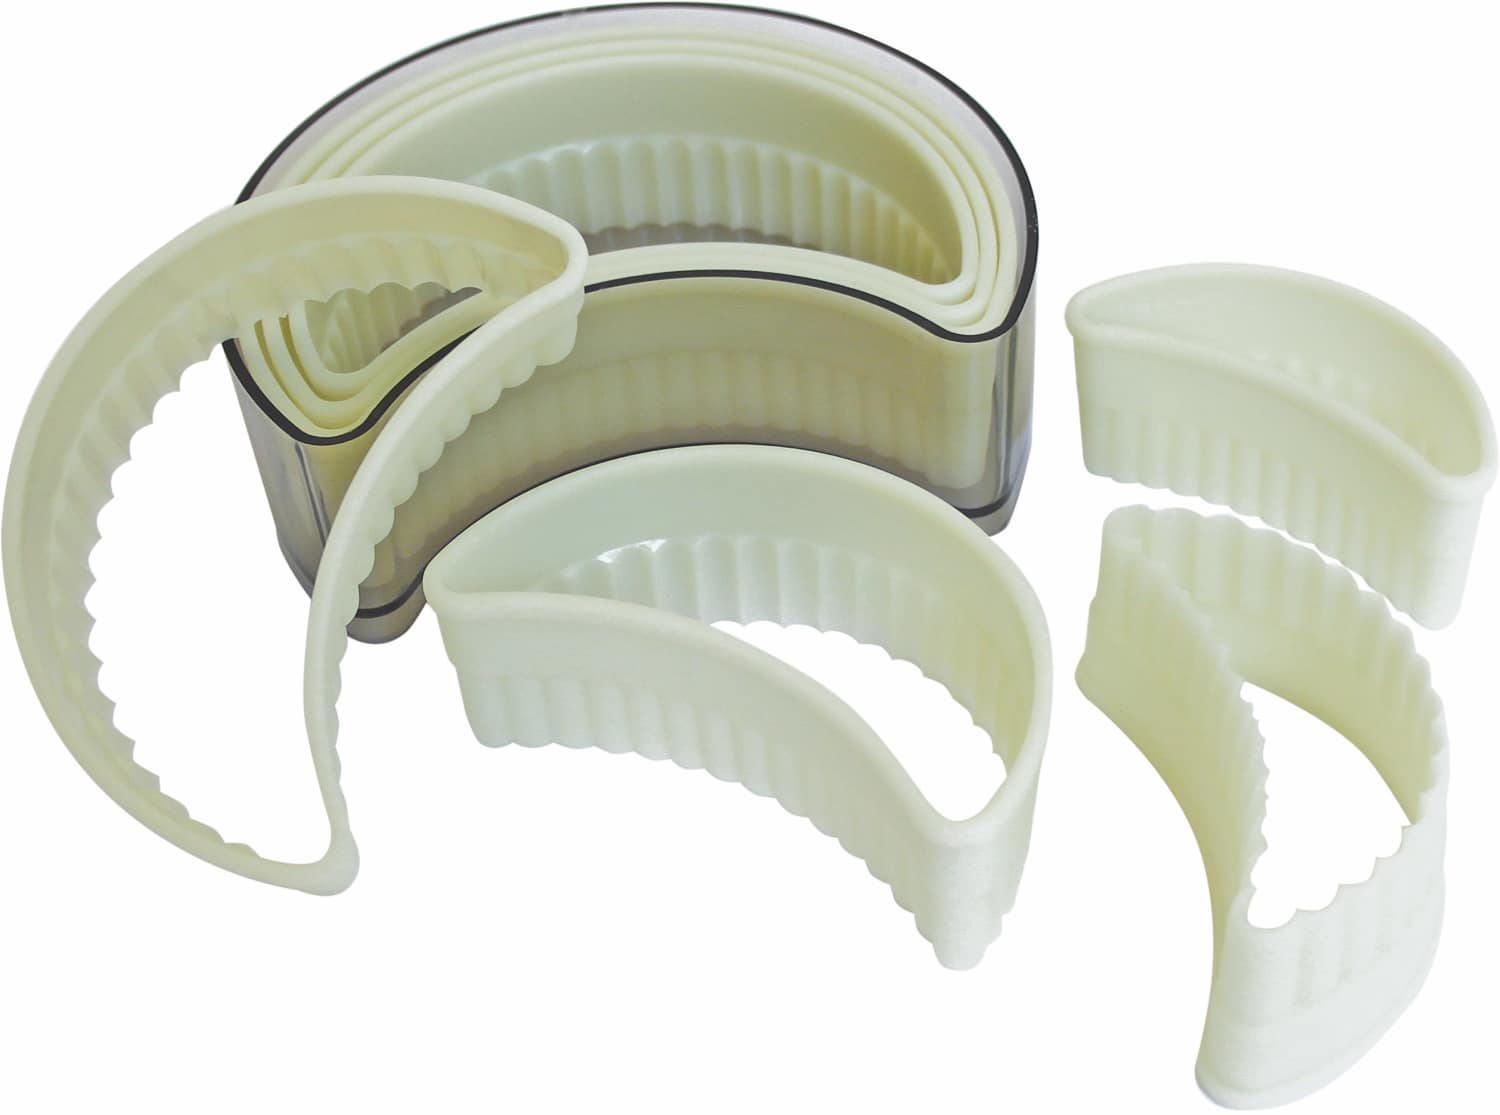 Set of pastry cutters "half moon,serrated" 7 pieces